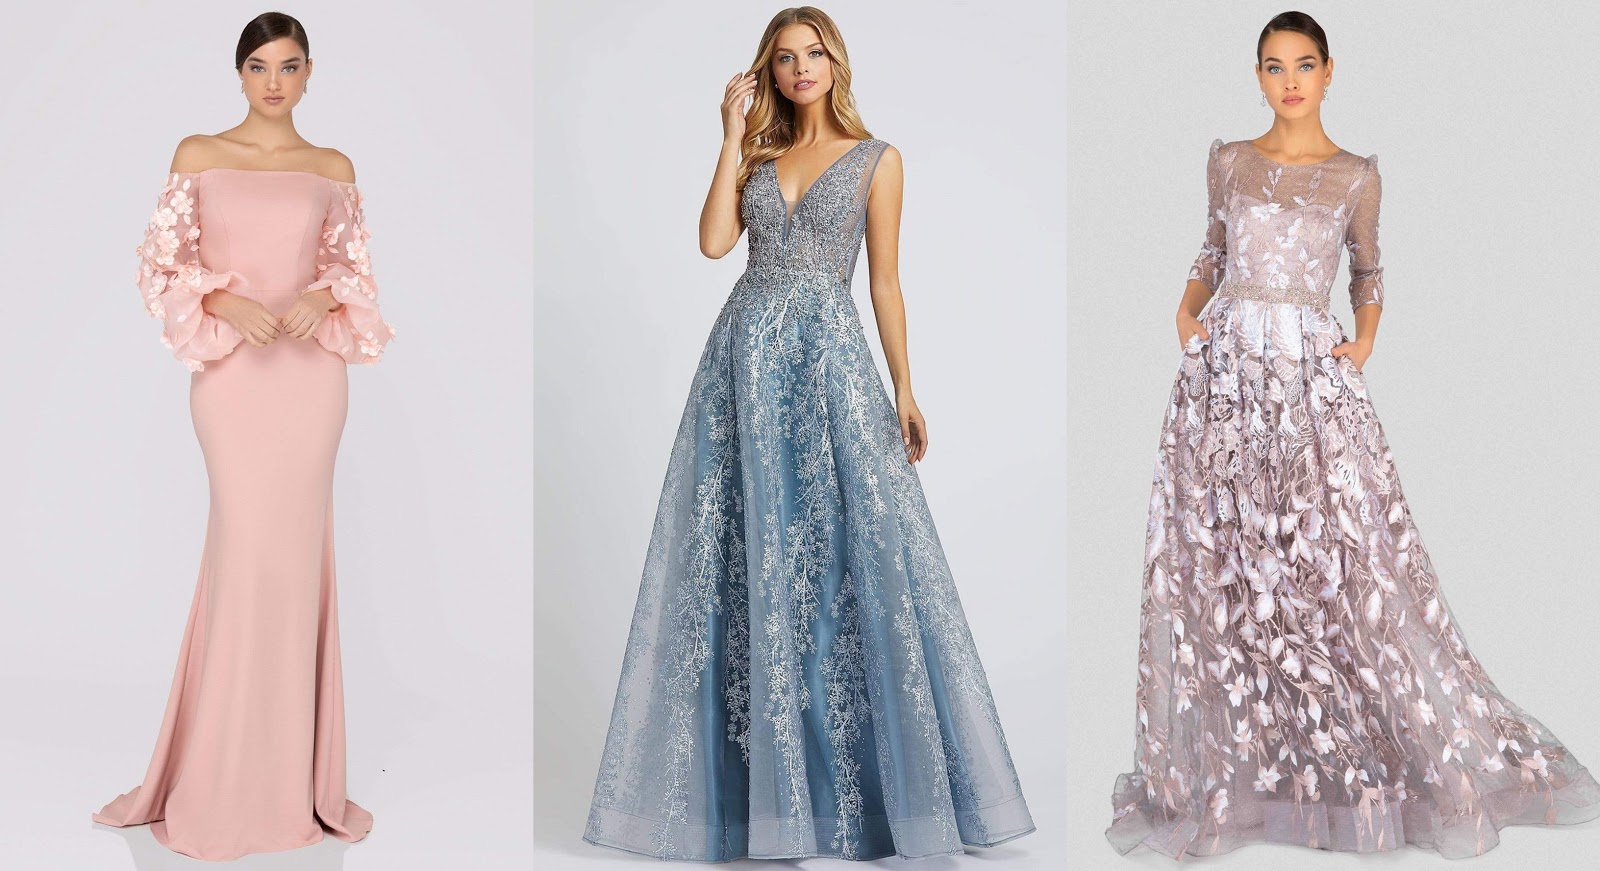 The Latest Trends of Evening Dresses To Wear in 2021